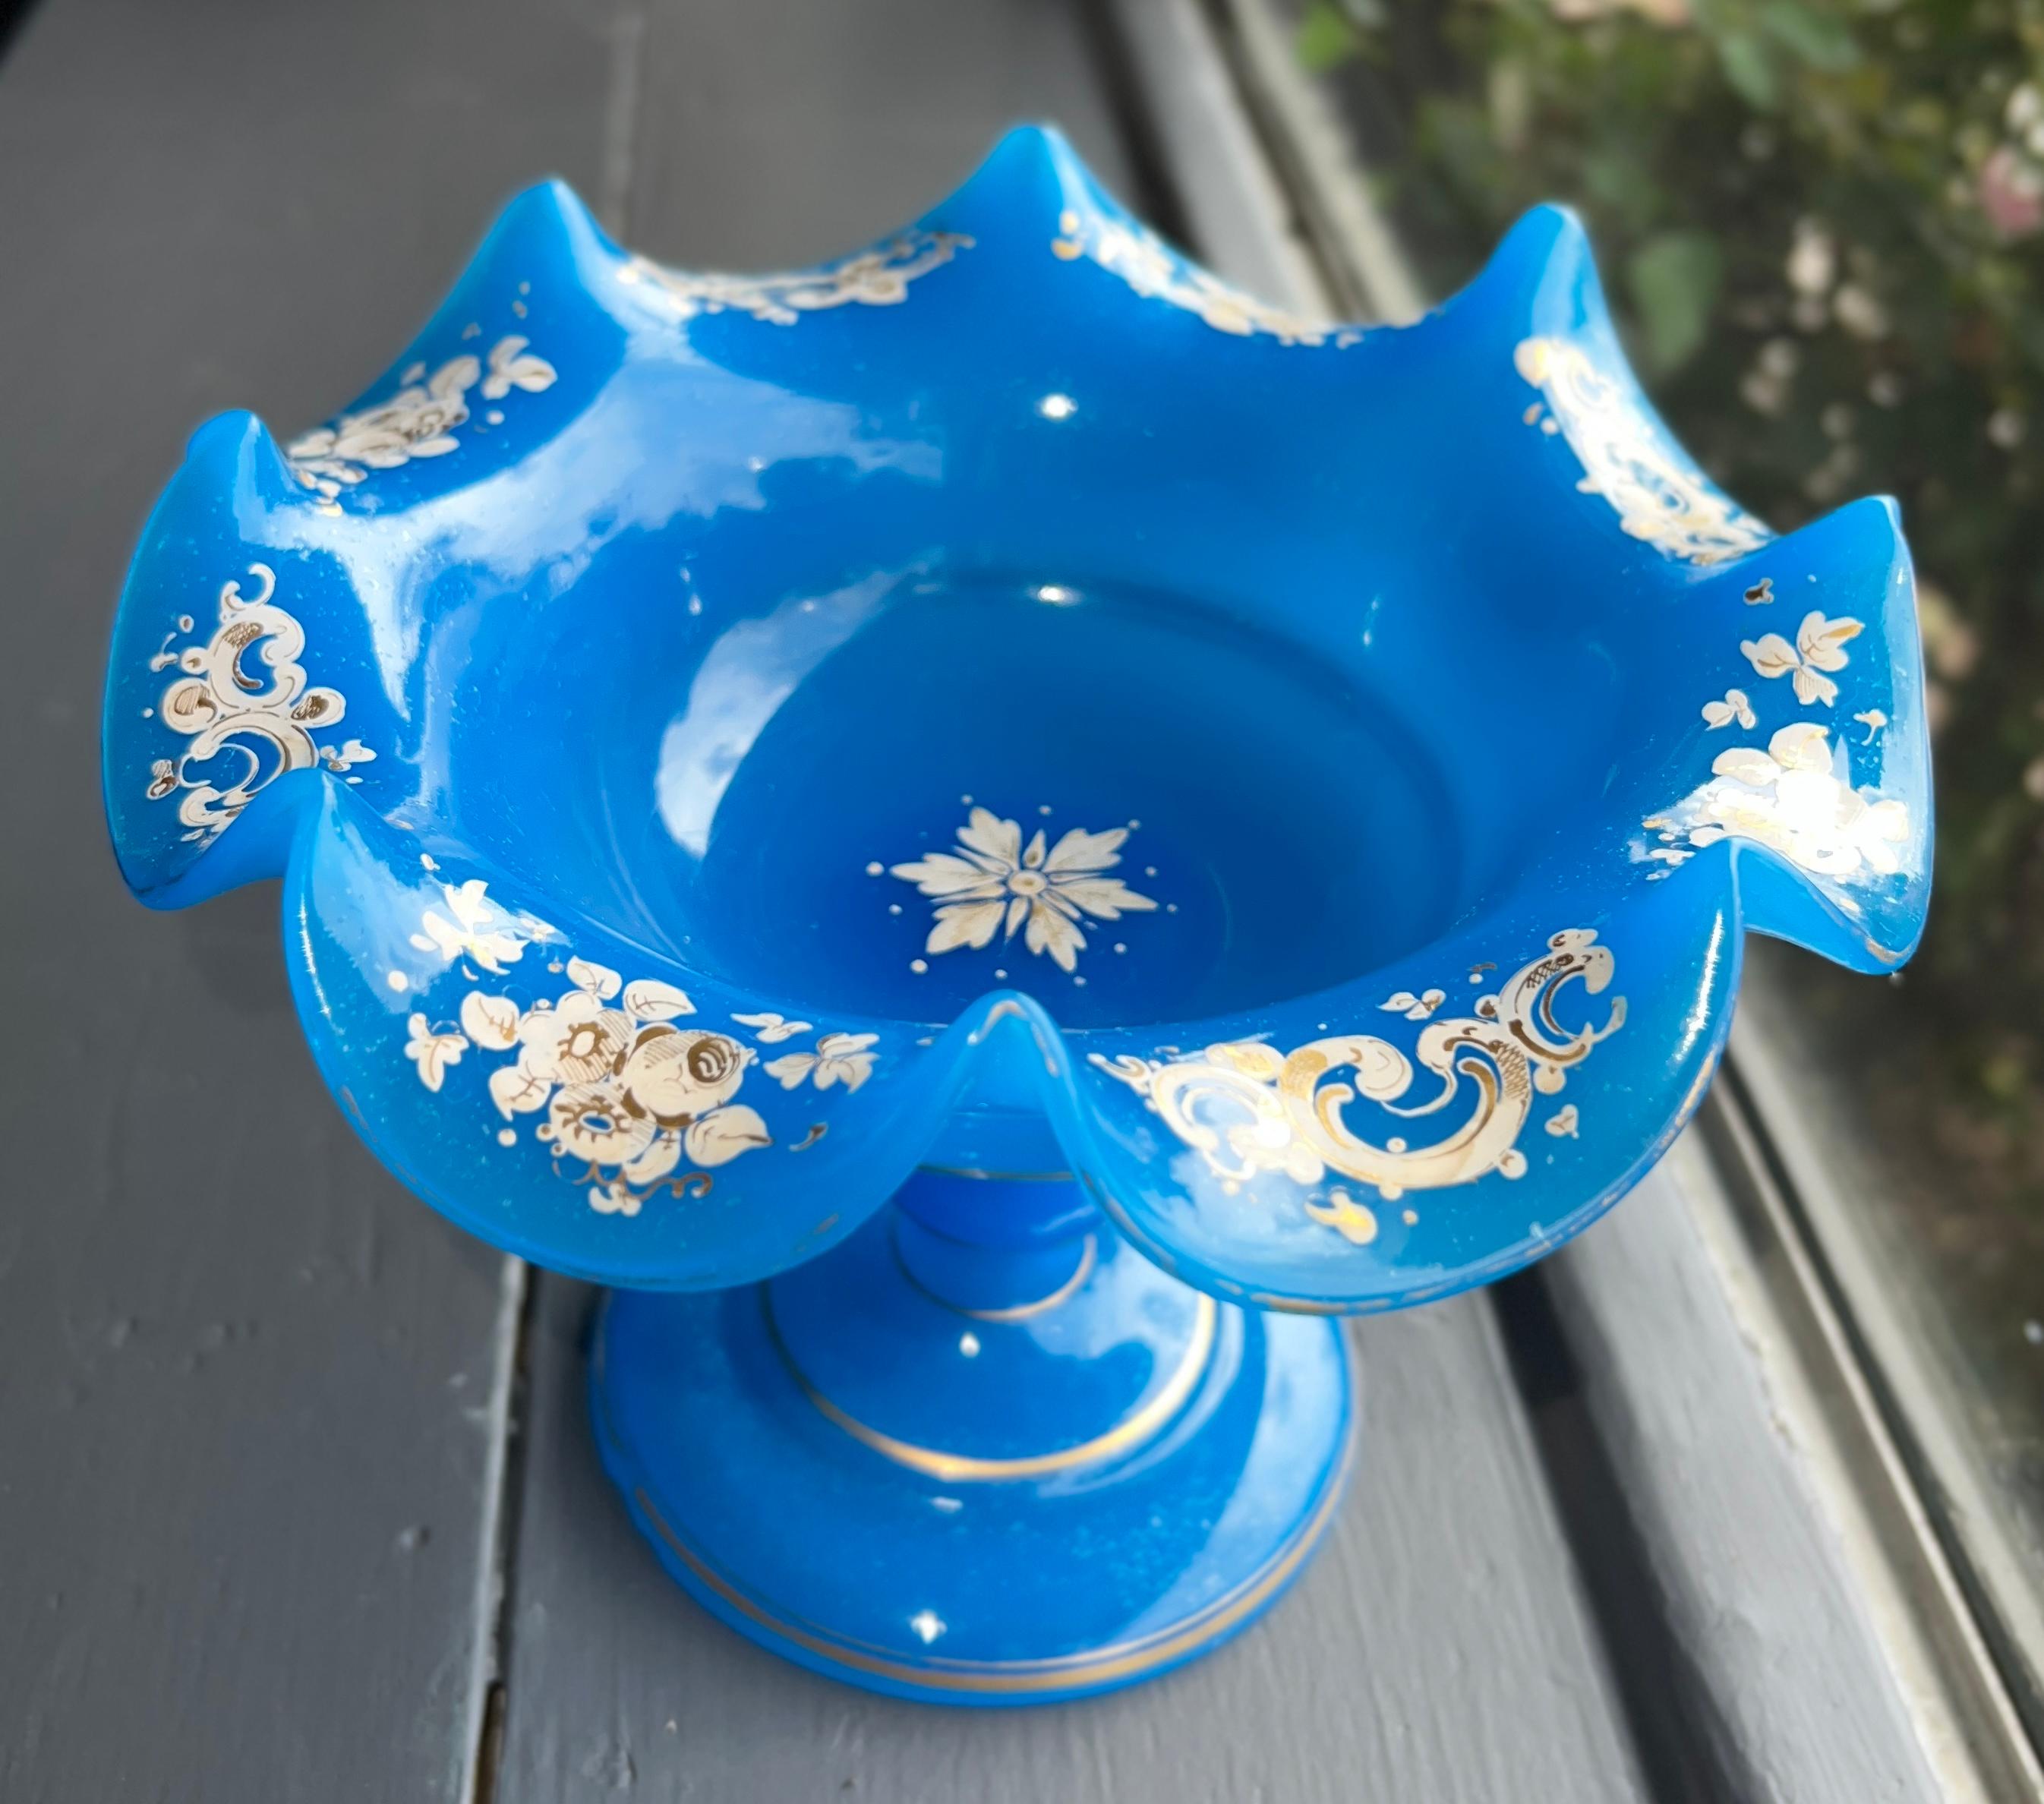 19th Century Antique French Blue Opaline Glass Bowl.
Fine quality. Hand painted with gilding enamel decoration, and wavy rim.